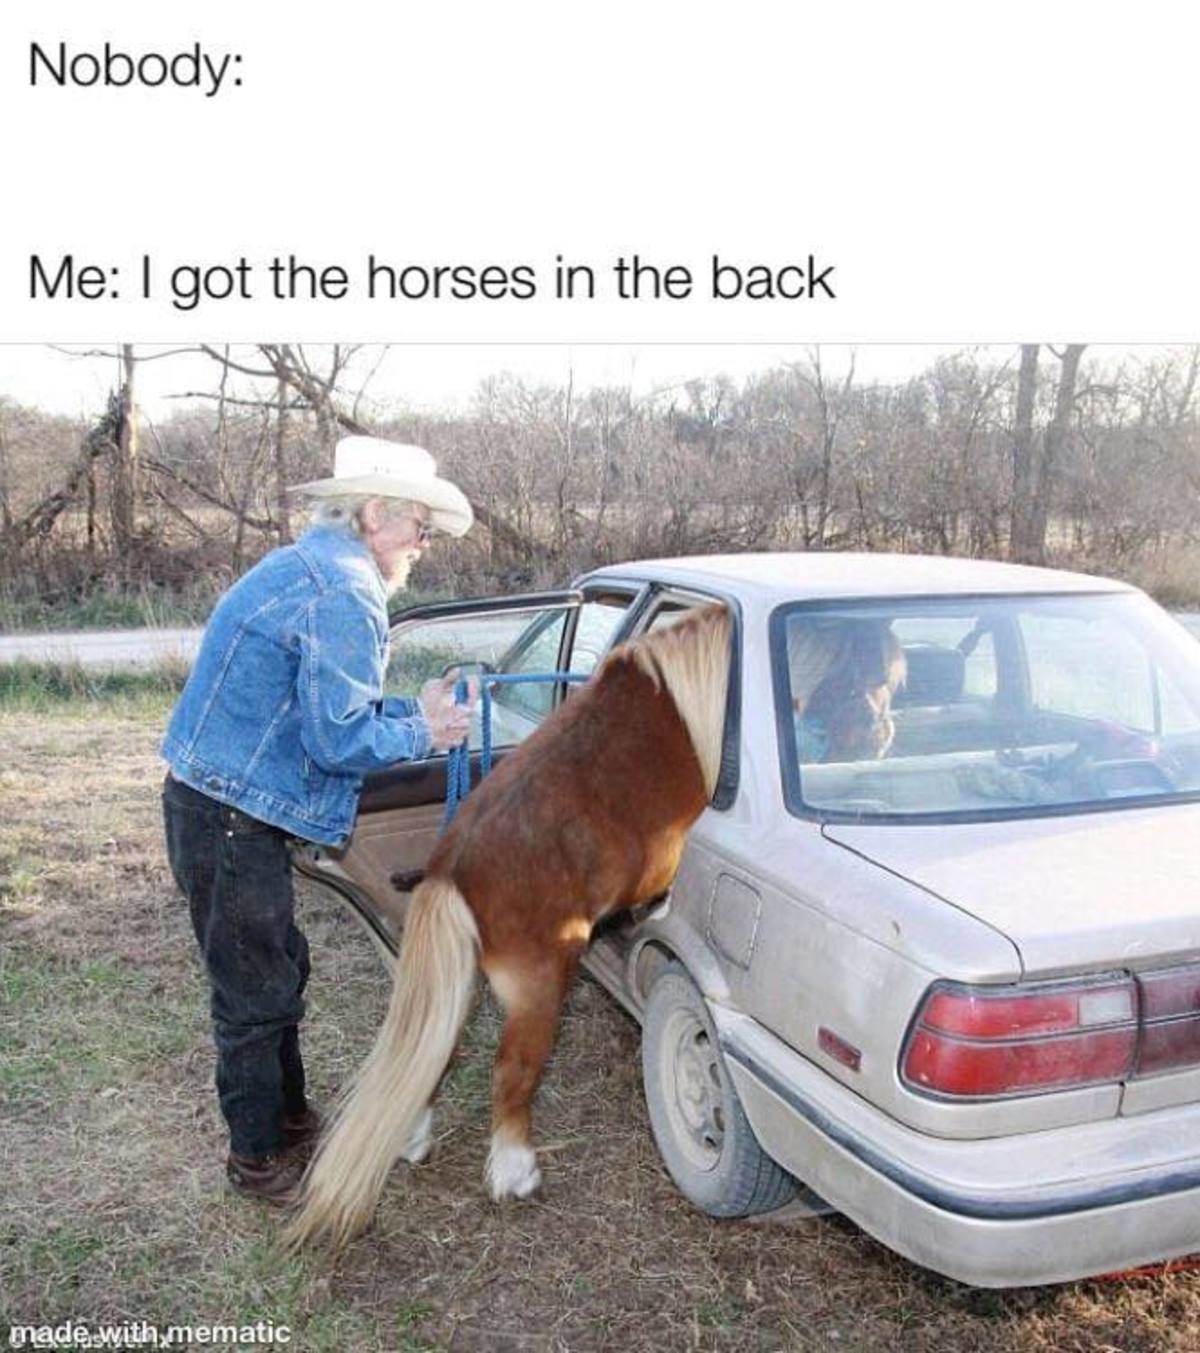 horsey. .. god i hate that song of course it got taken off the country charts did anyone even listen to it i swear billy ray cyrus was like &quot;lets make this meme a rea